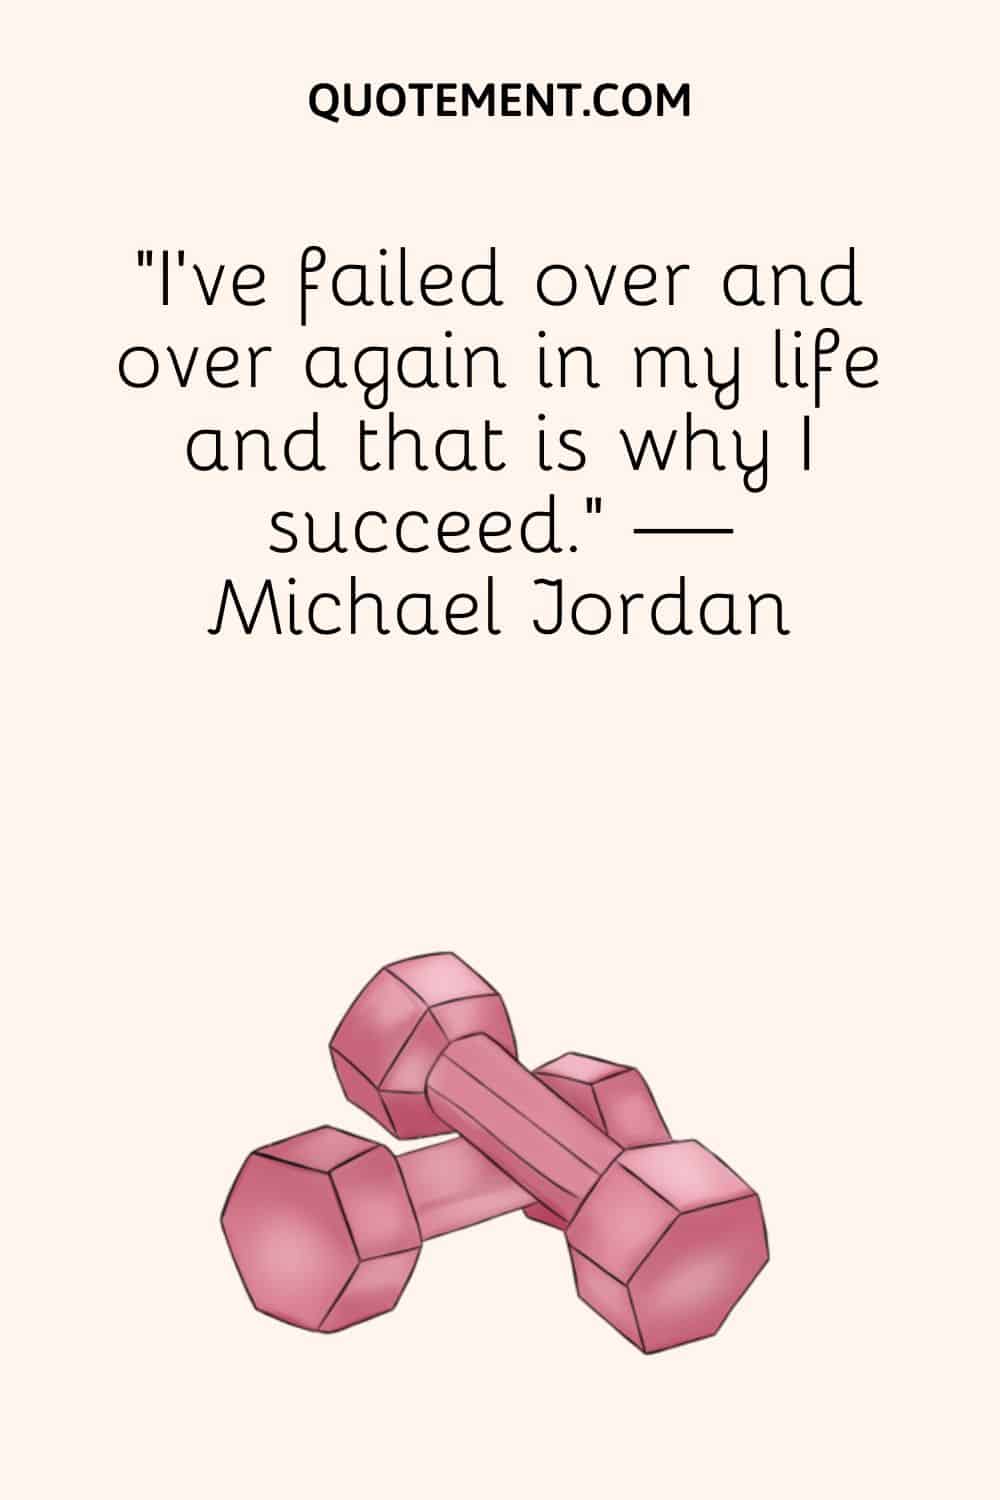 “I’ve failed over and over again in my life and that is why I succeed.” — Michael Jordan